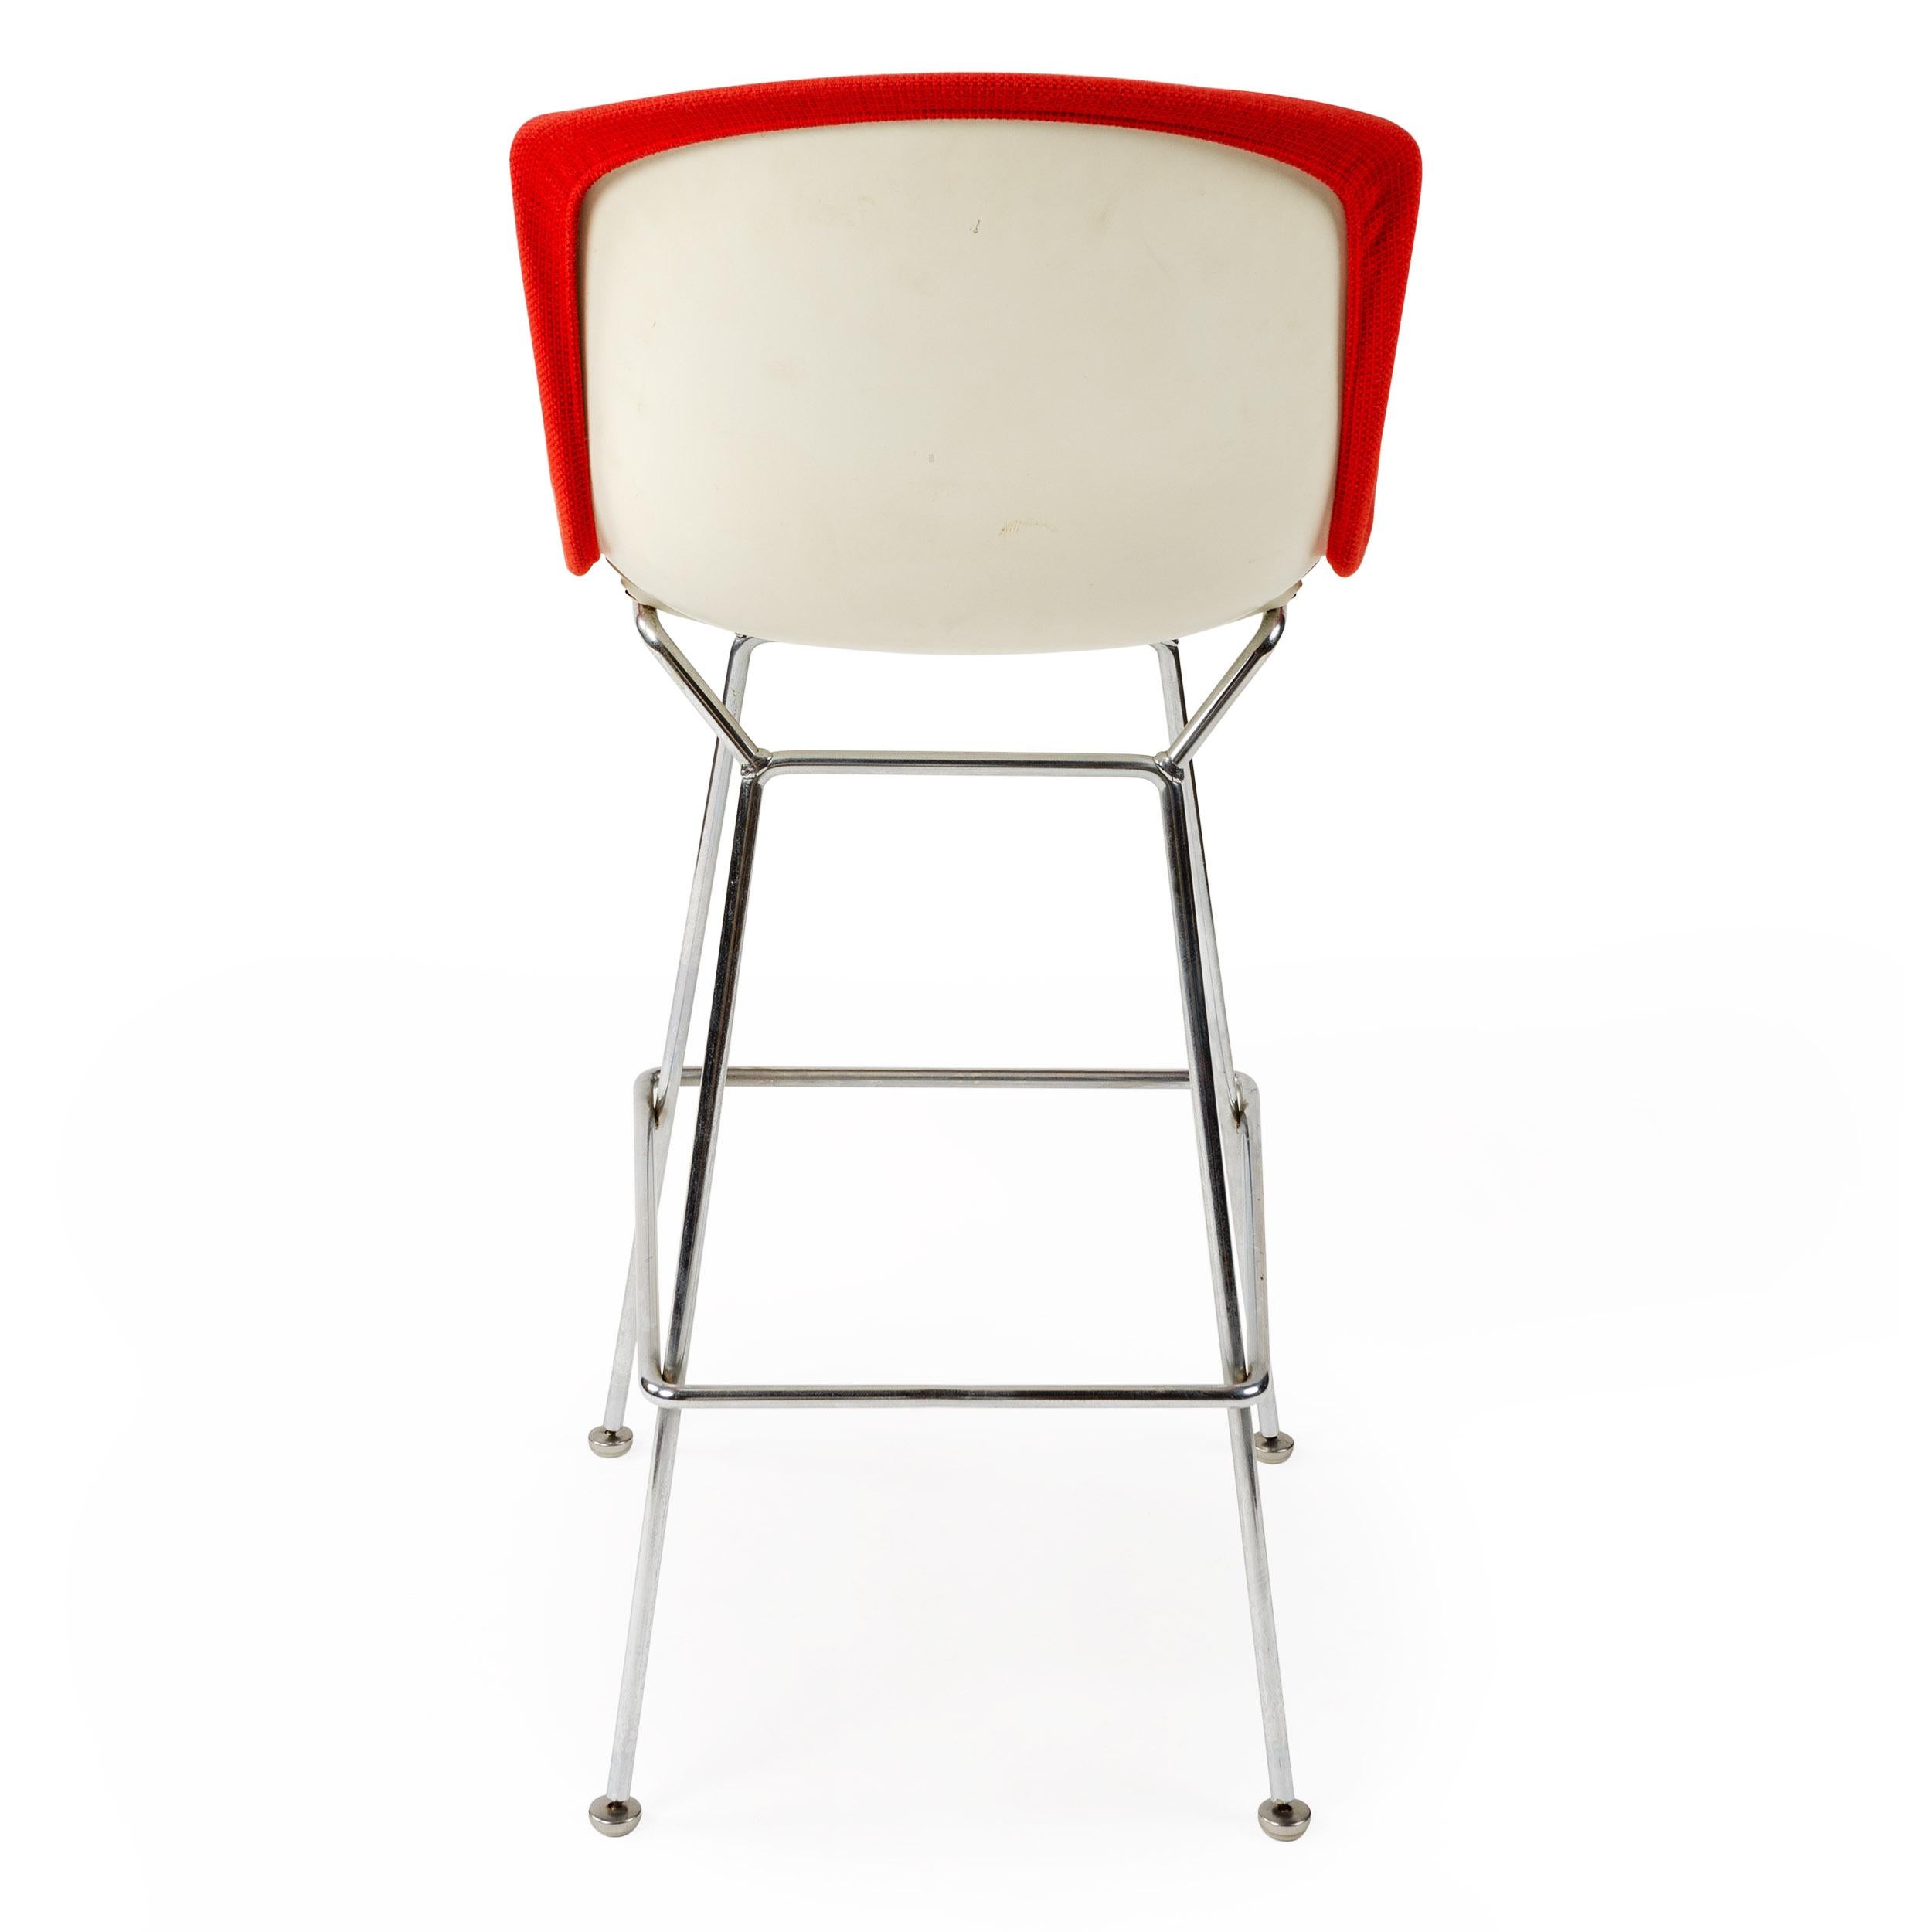 Mid-Century Modern Red Barstool by Harry Bertoia For Sale